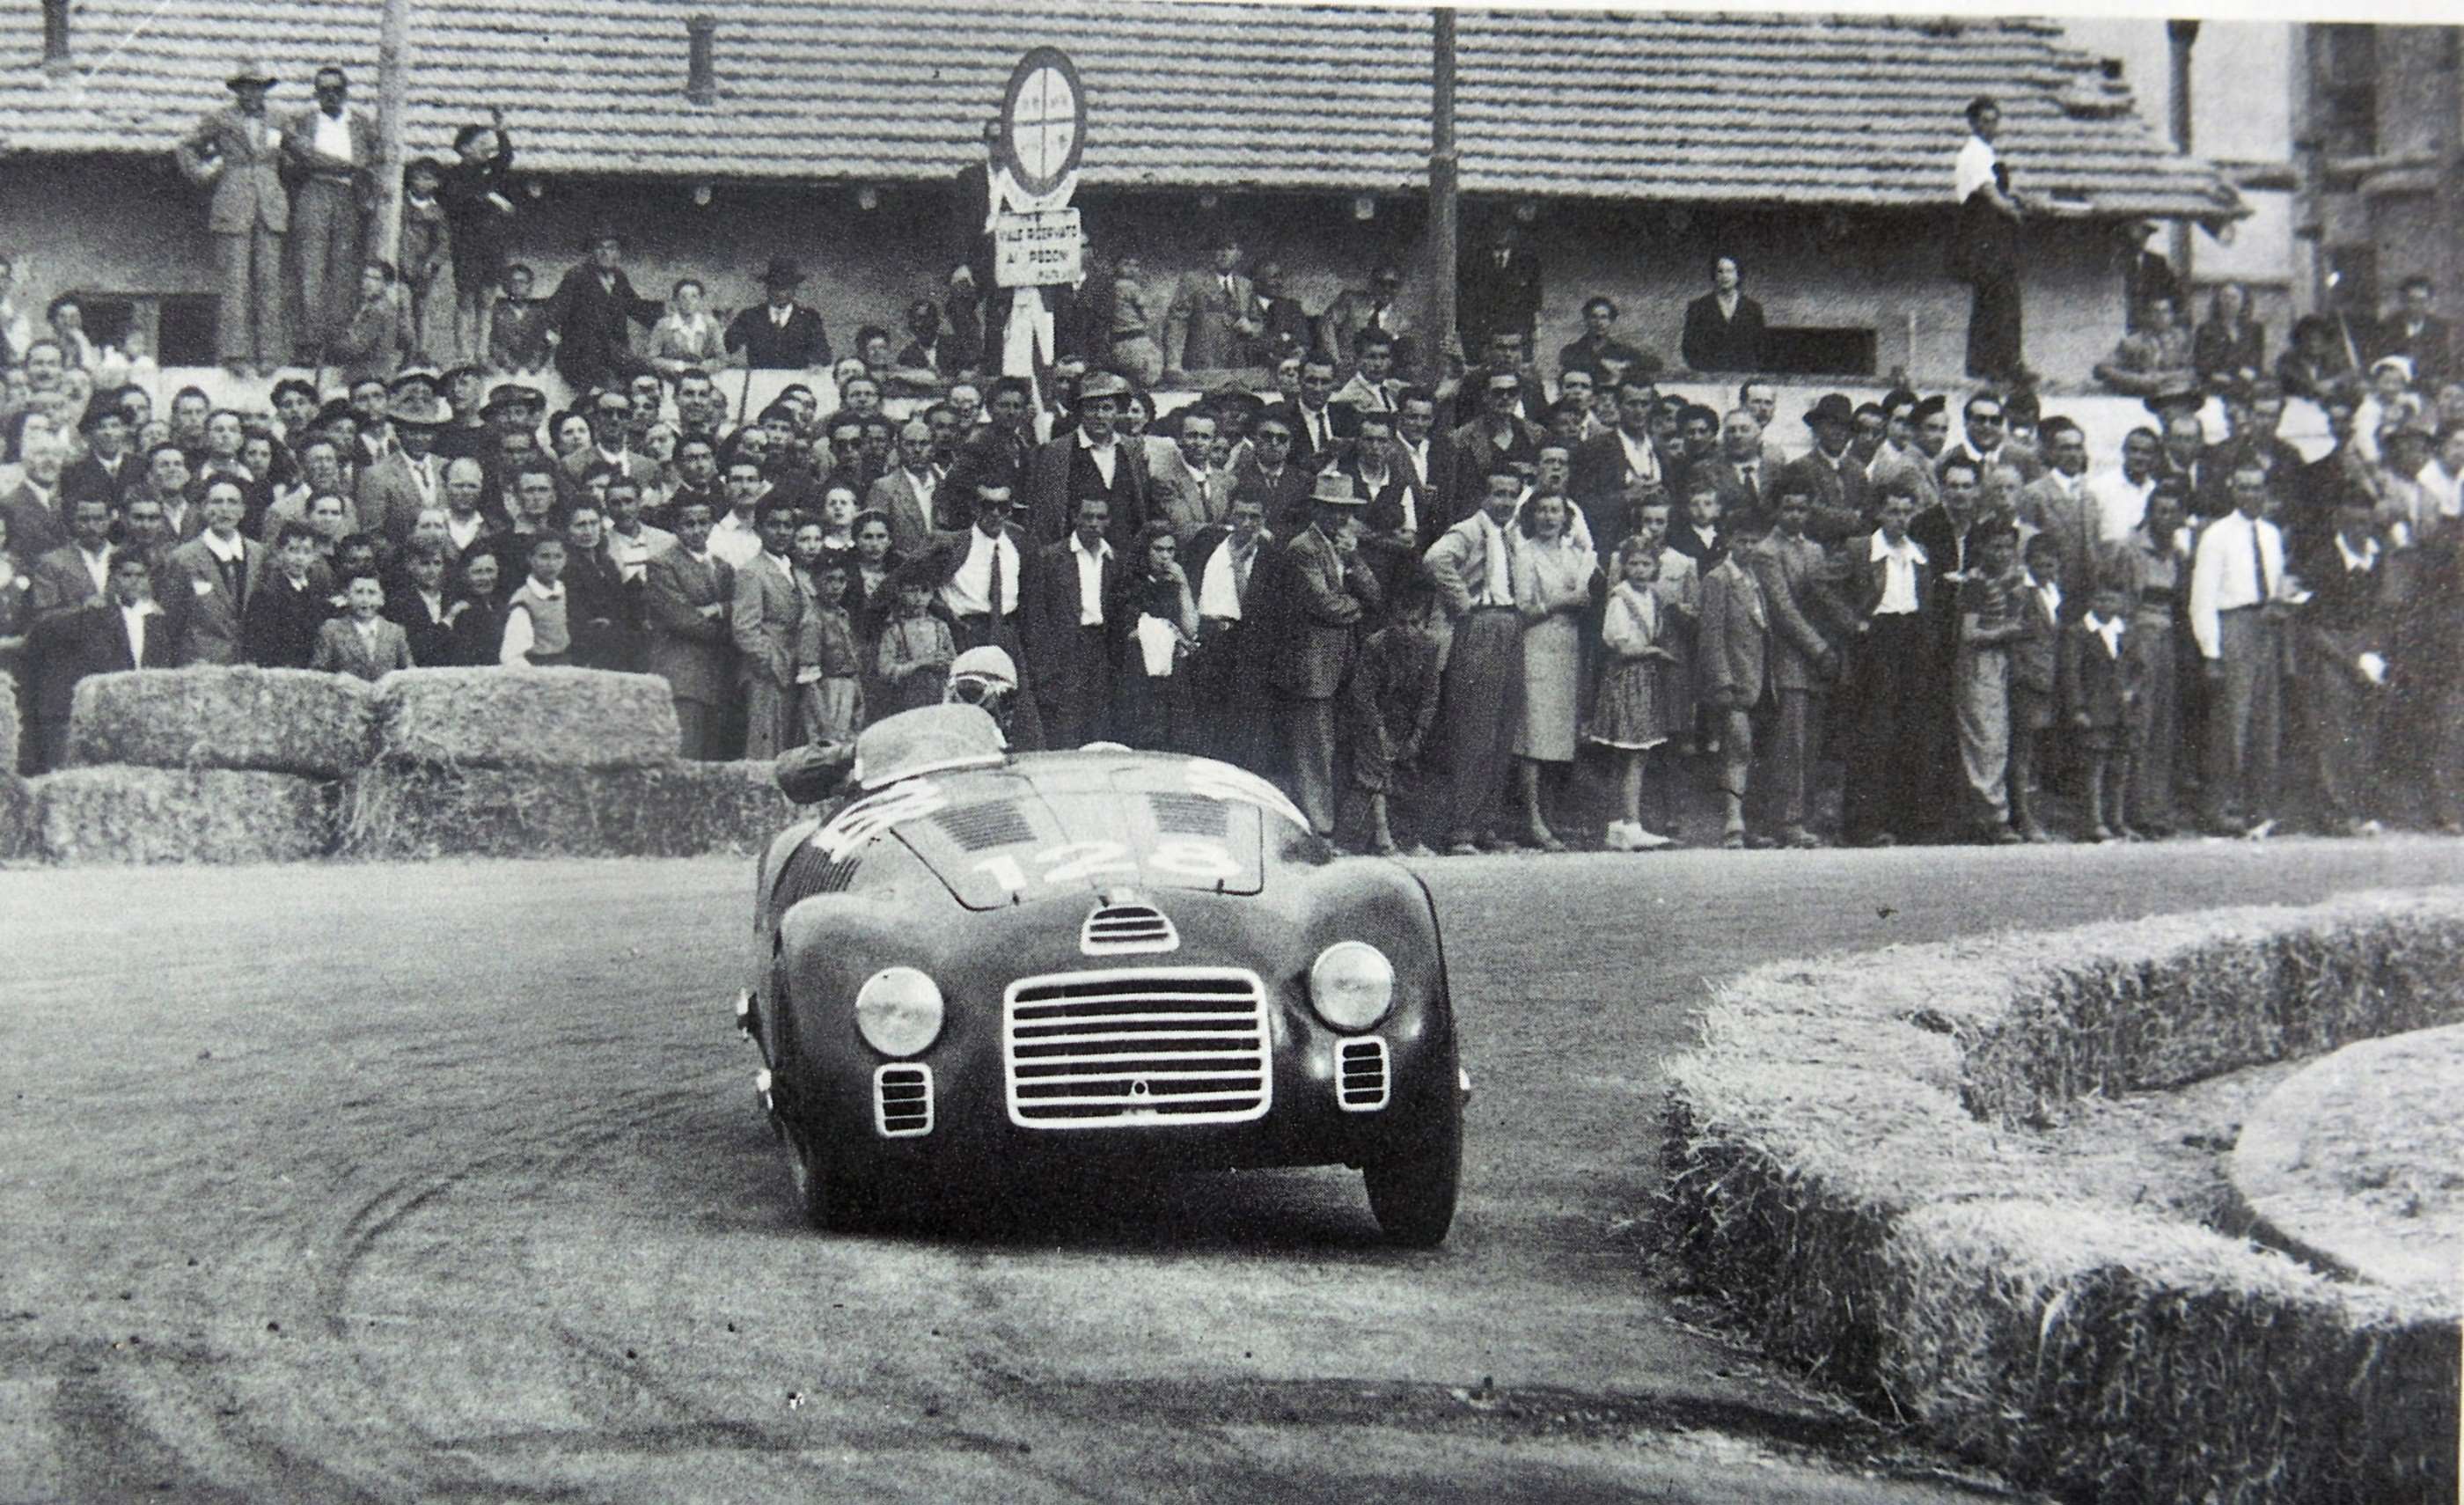 May 11th, 1947 - Piacenza, Italy - Franco Cortese in the first prototype Ferrari 125 V12 sports-racing car makes its public debut.
